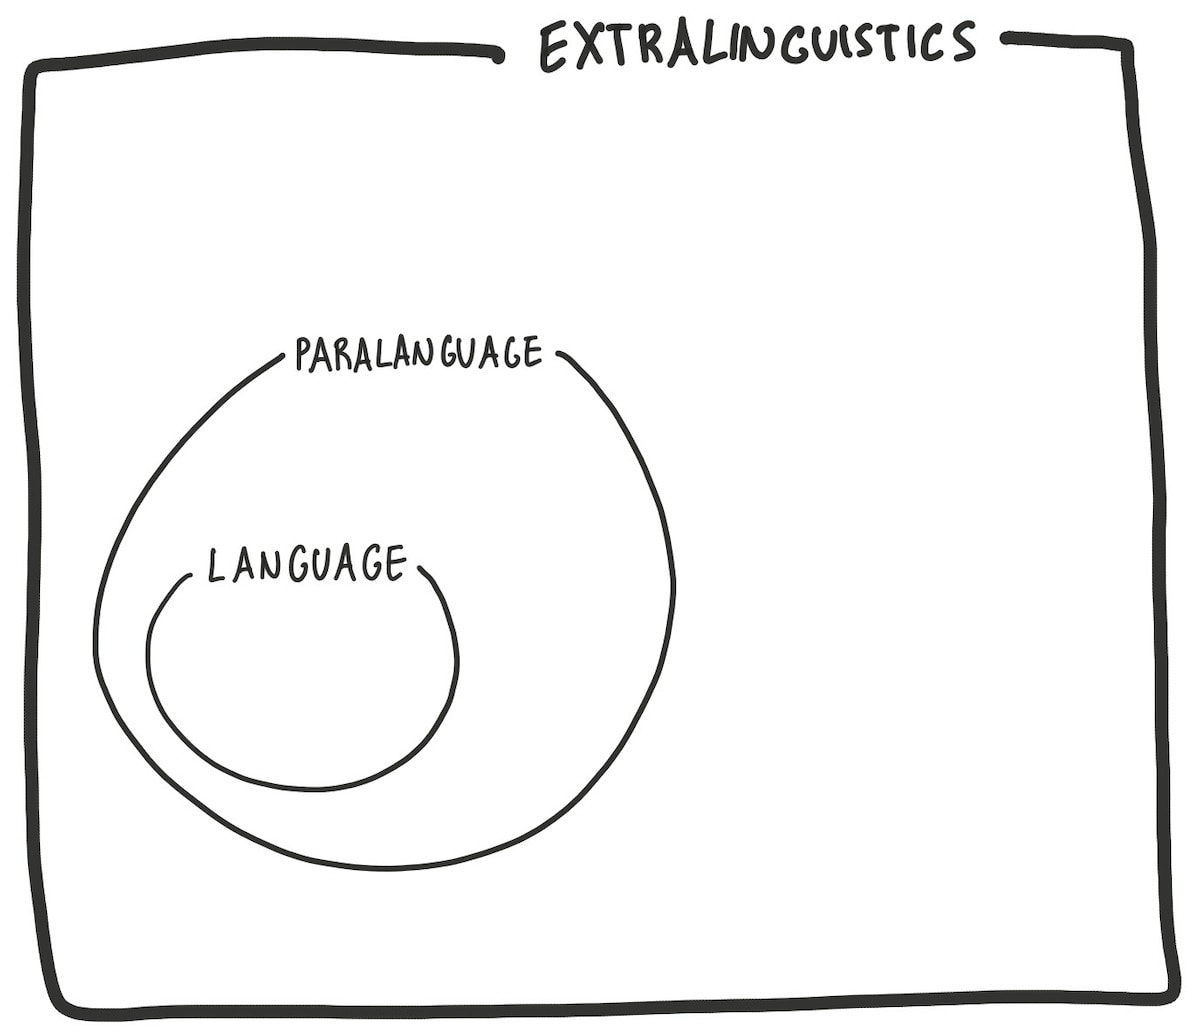 A Venn diagram of language, paralanguage, and extra-linguistics, from inside out